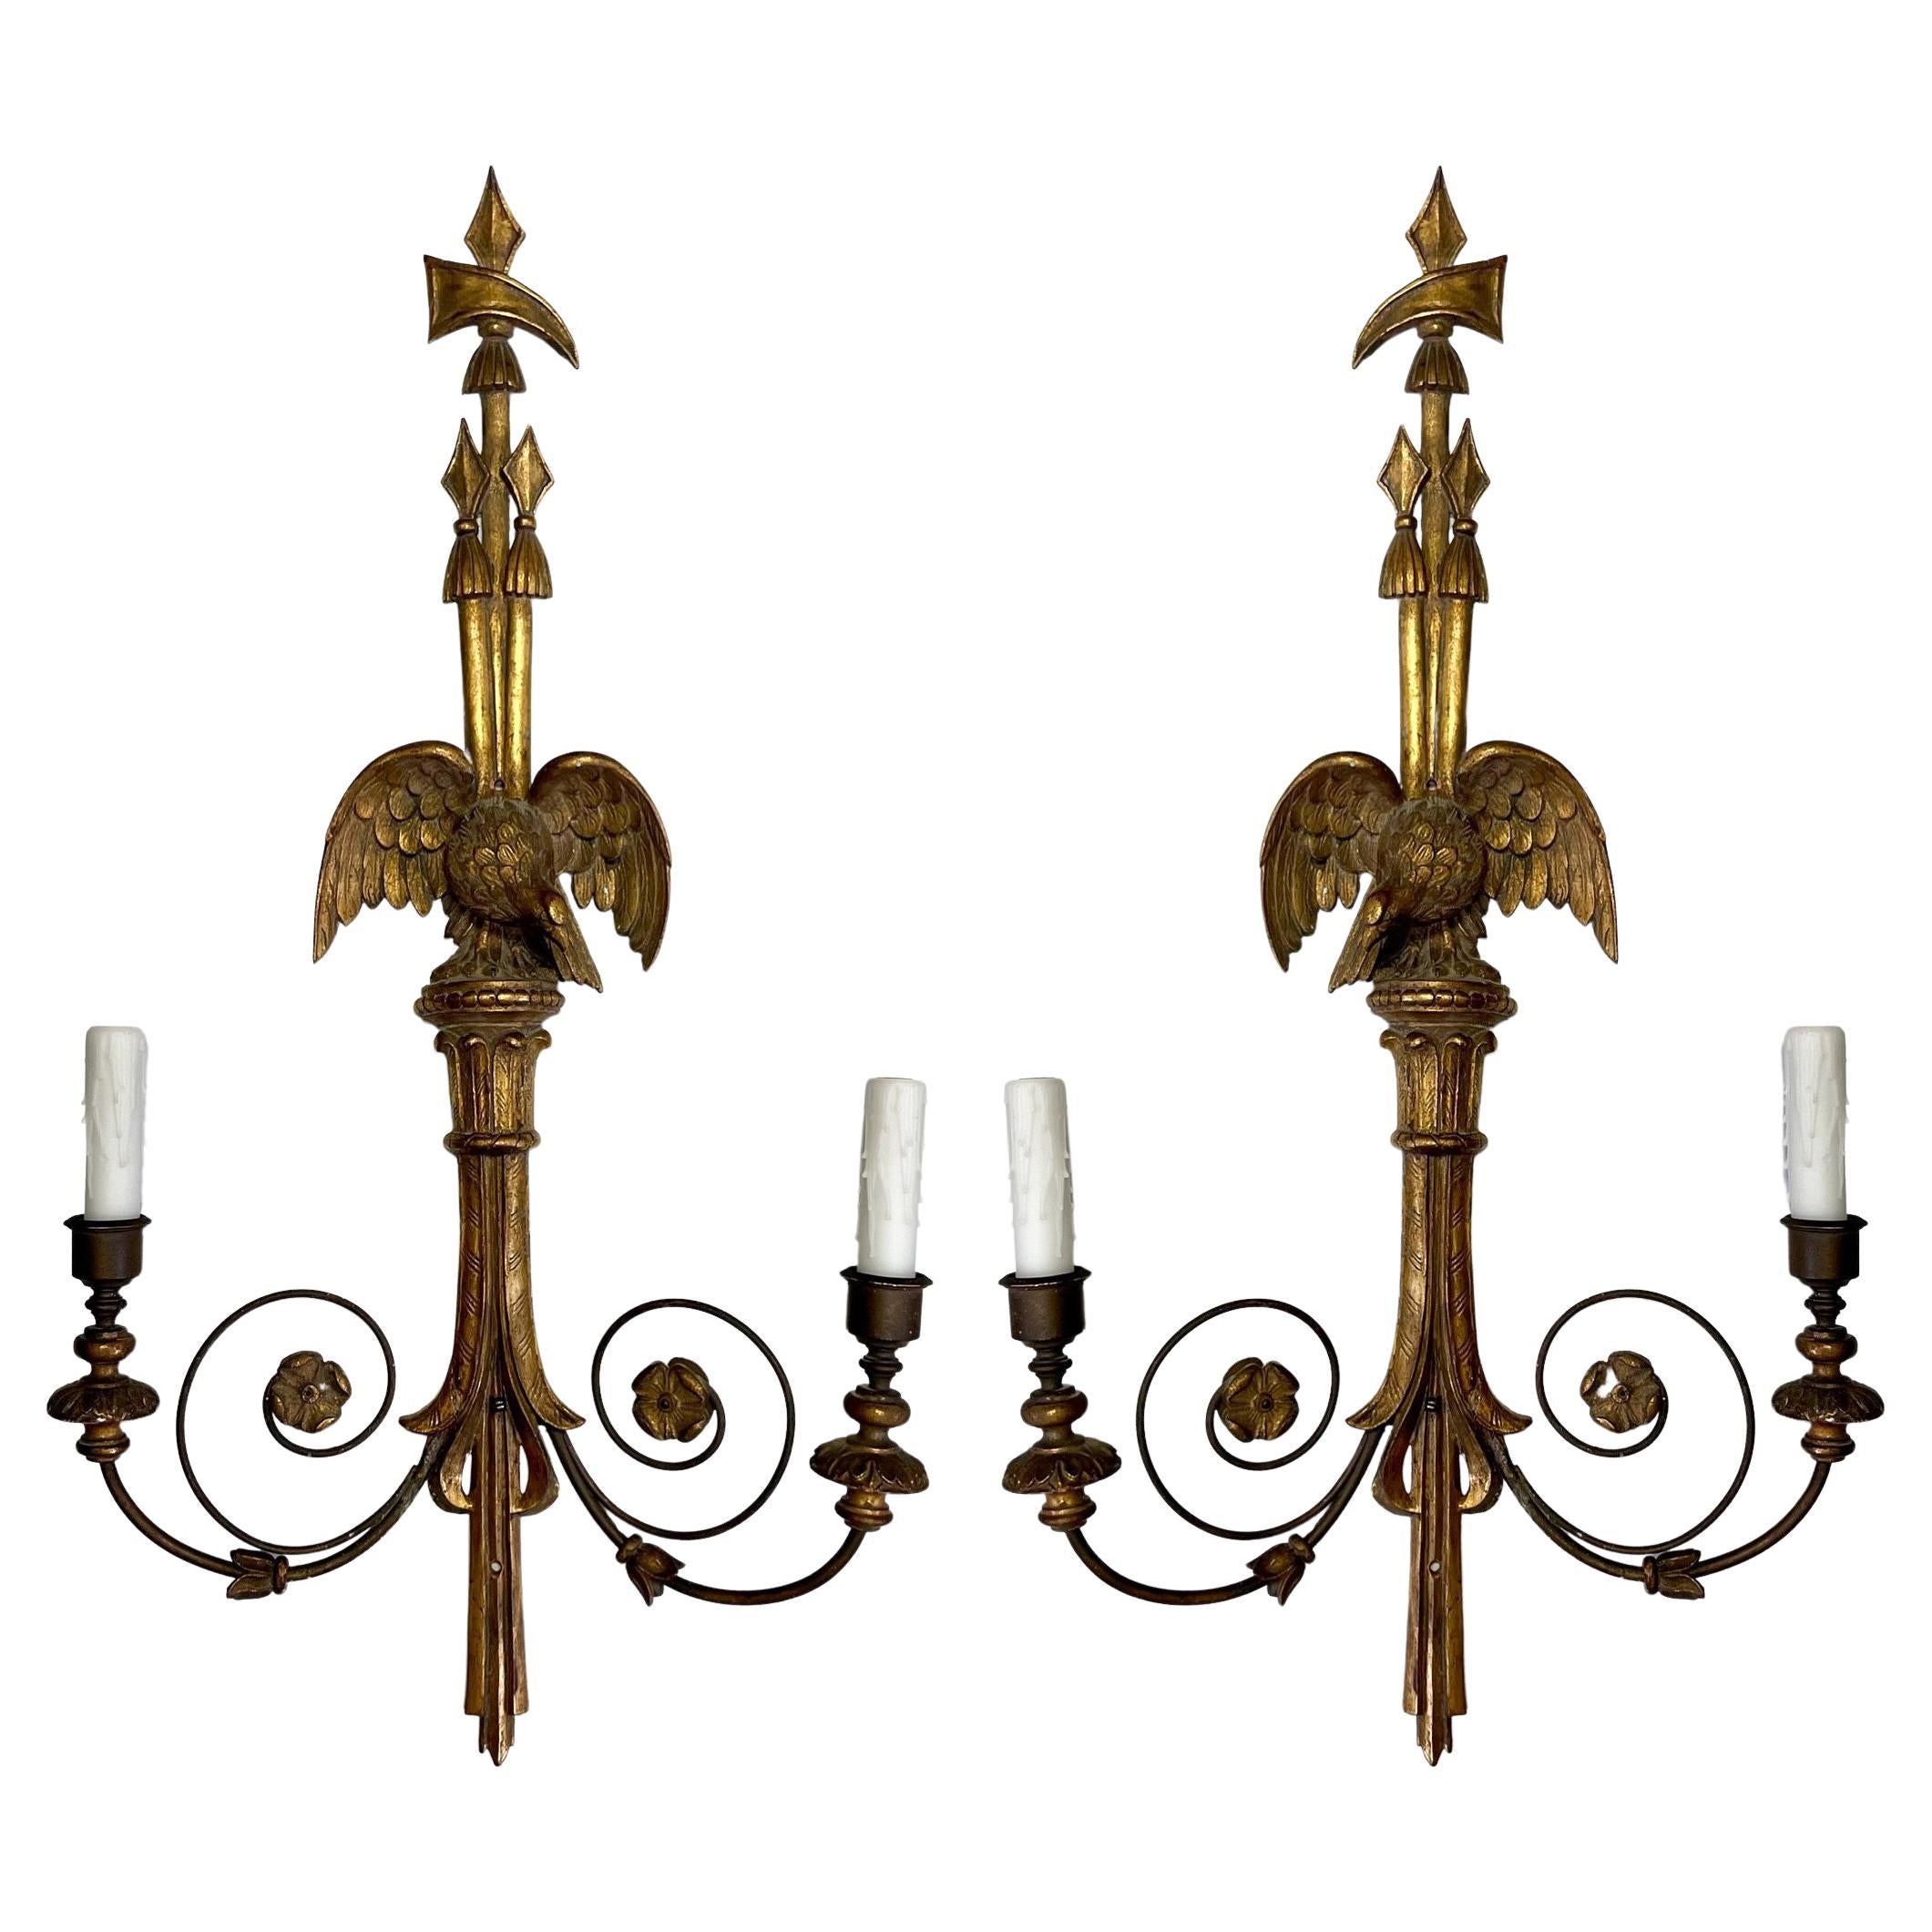 Late 19th-C. Federal Style Carved Giltwood Eagle Form Sconces, Pair For Sale